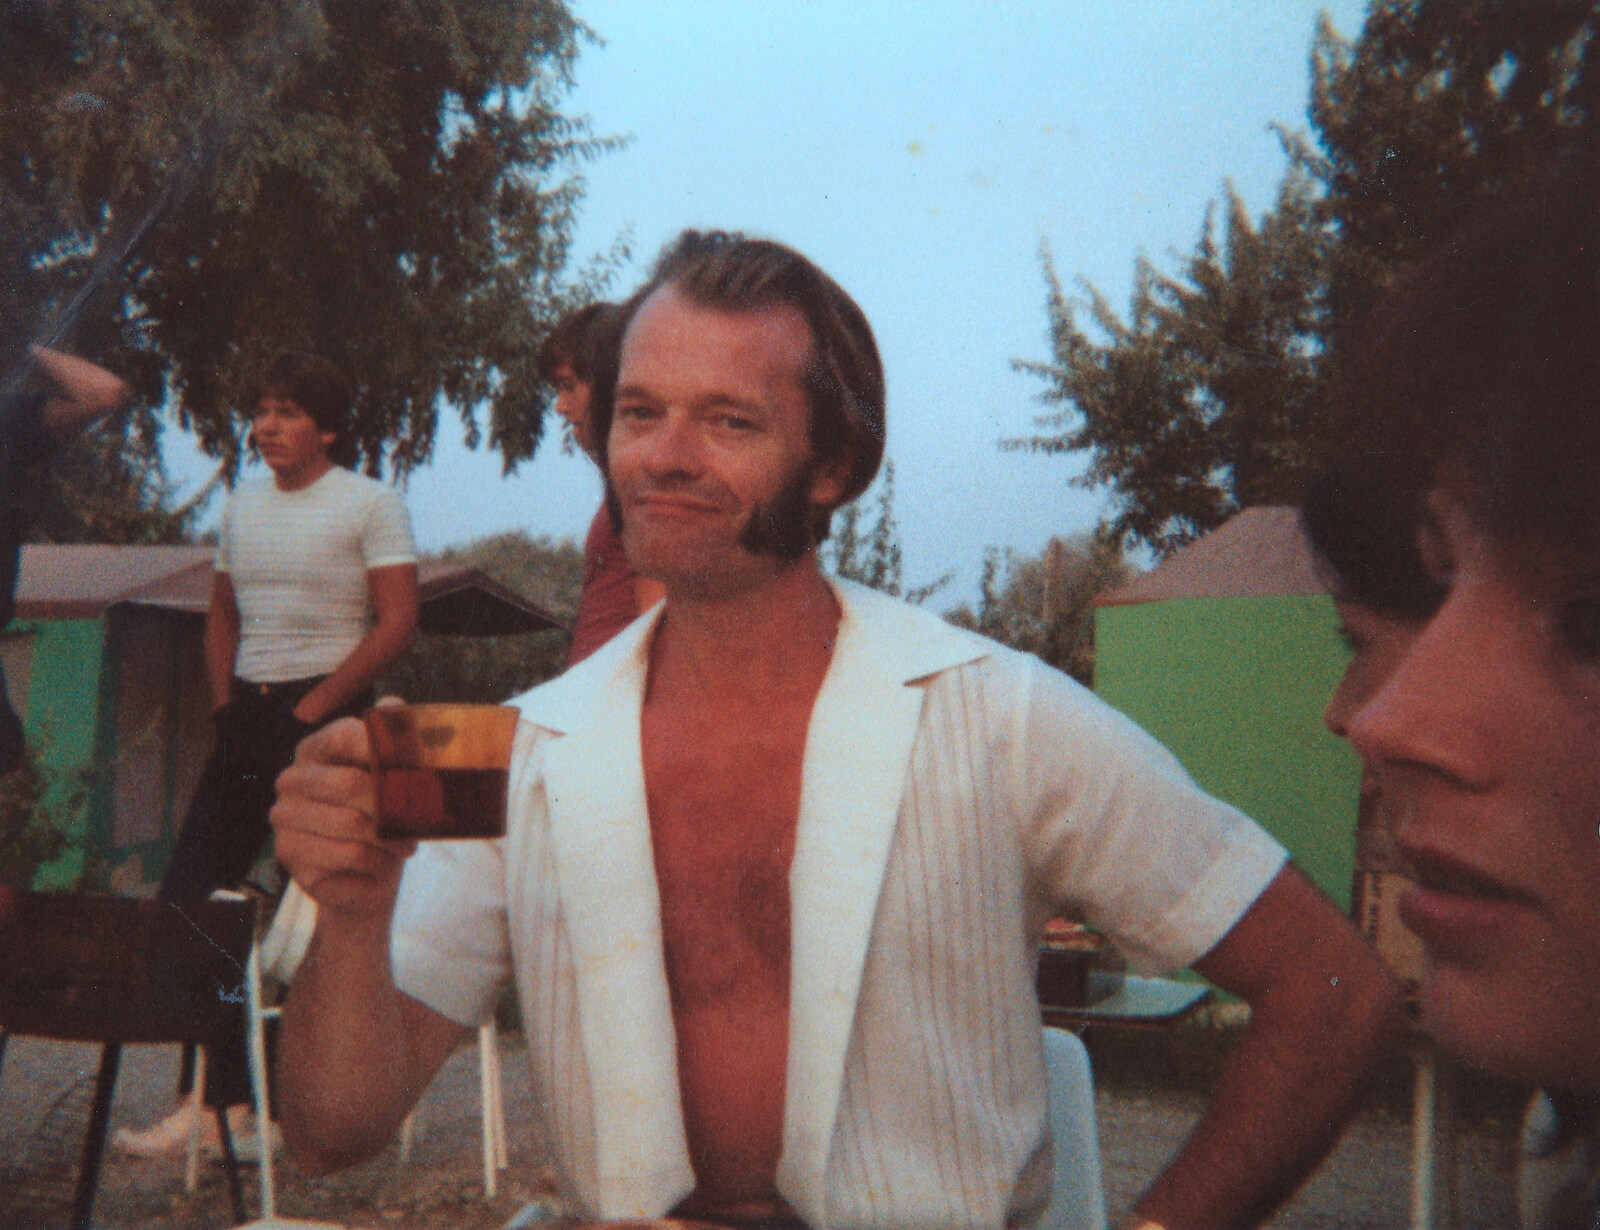 Dave has a cup of tea from Camping with Sean, The Camargue, South of France, 15th July 1982